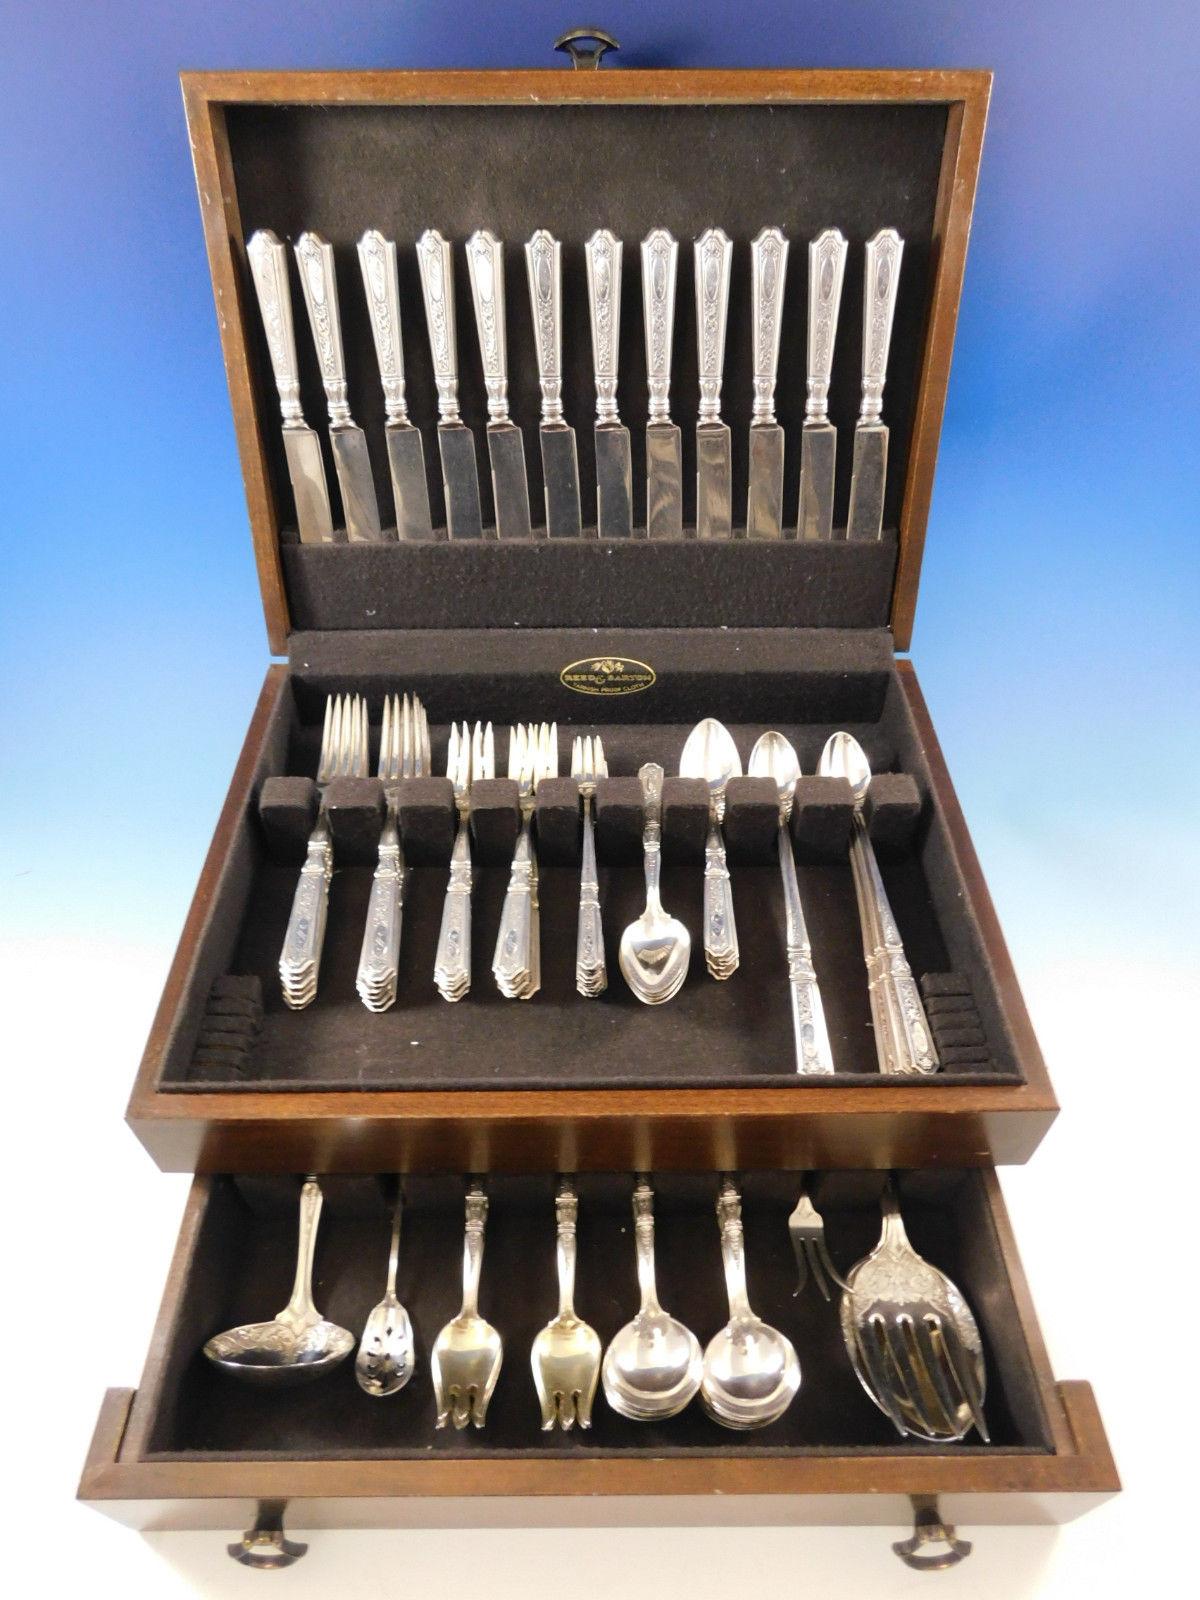 Large Saint Dunstan Chased by Gorham sterling silver flatware set of 96 pieces. This set includes:

12 knives, 8 3/8